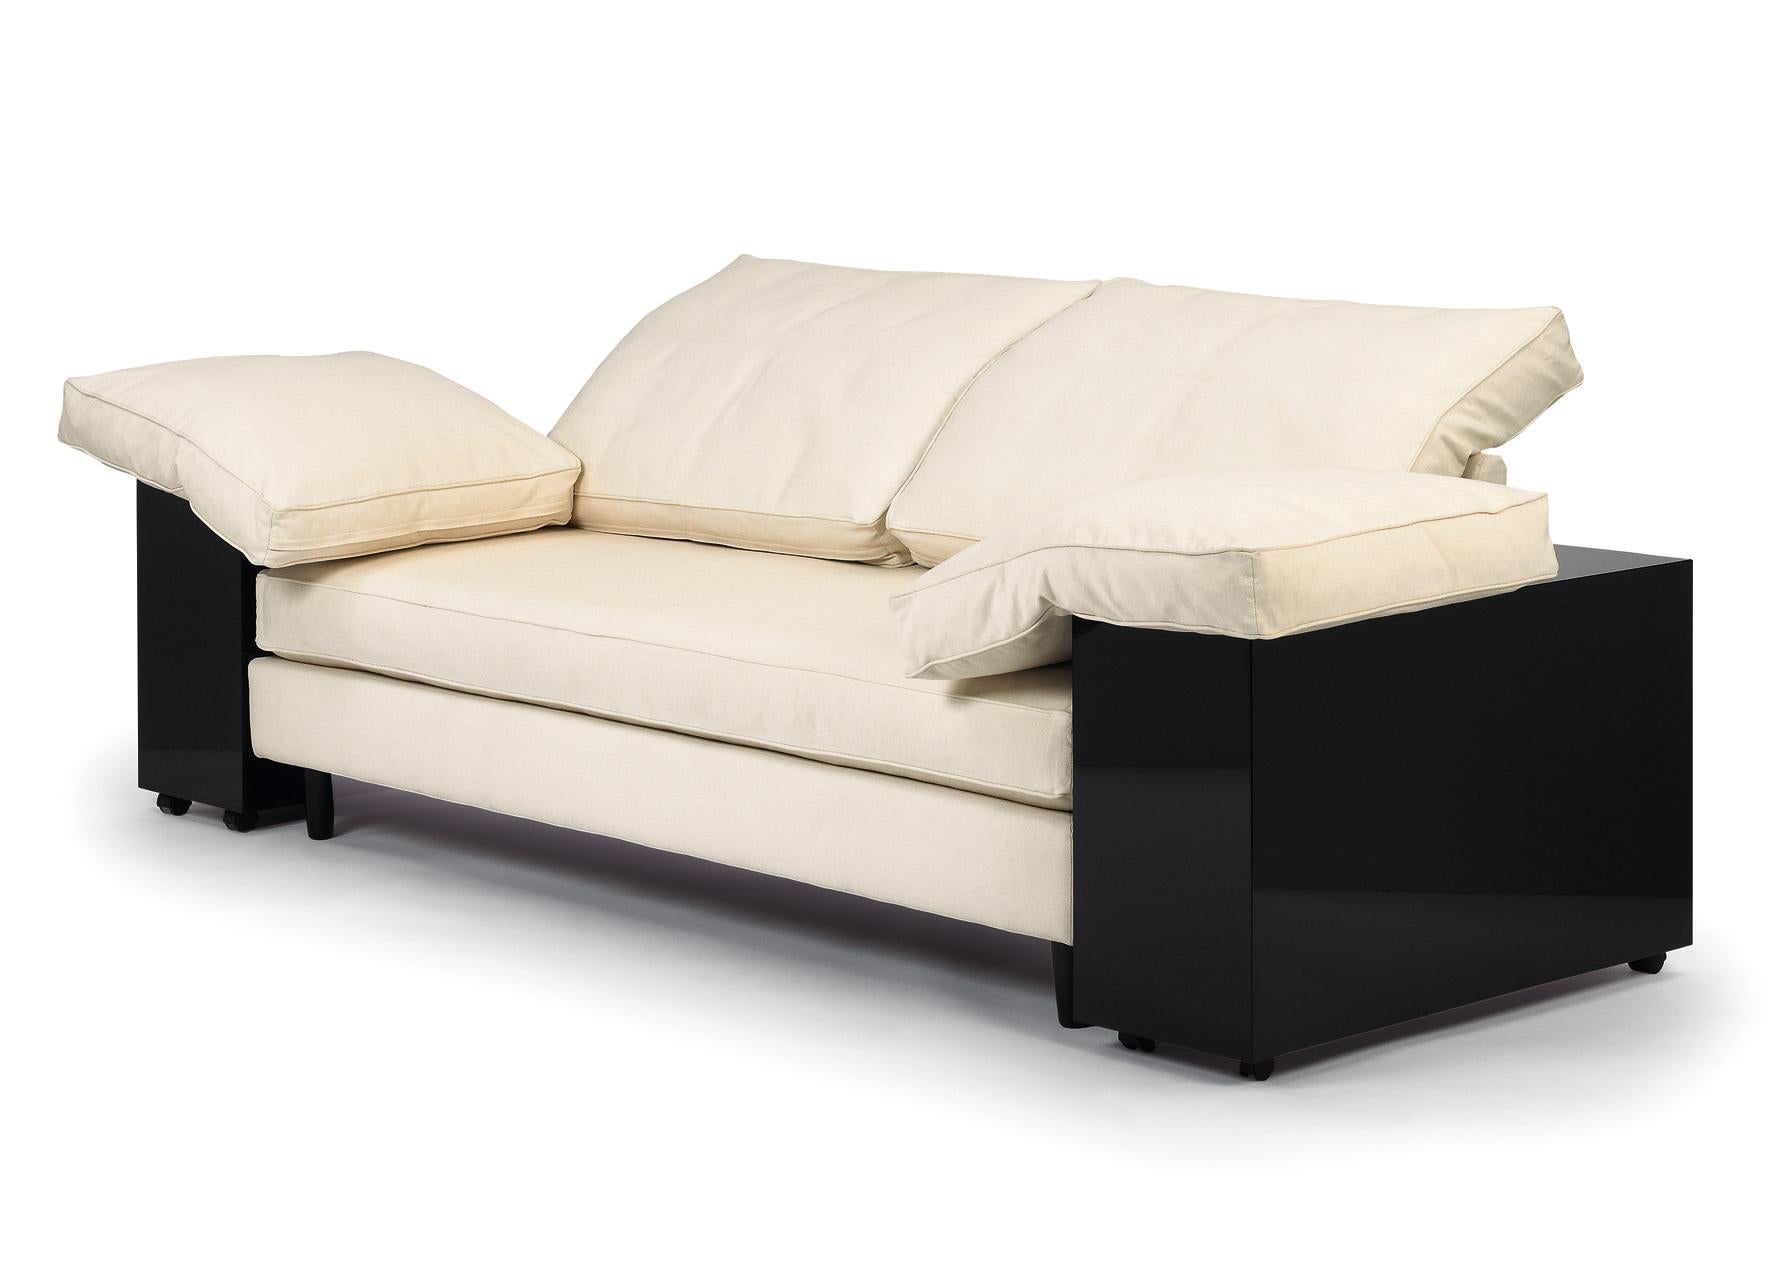 ClassiCon Lota Sofa by Eileen Gray For Sale at 1stDibs